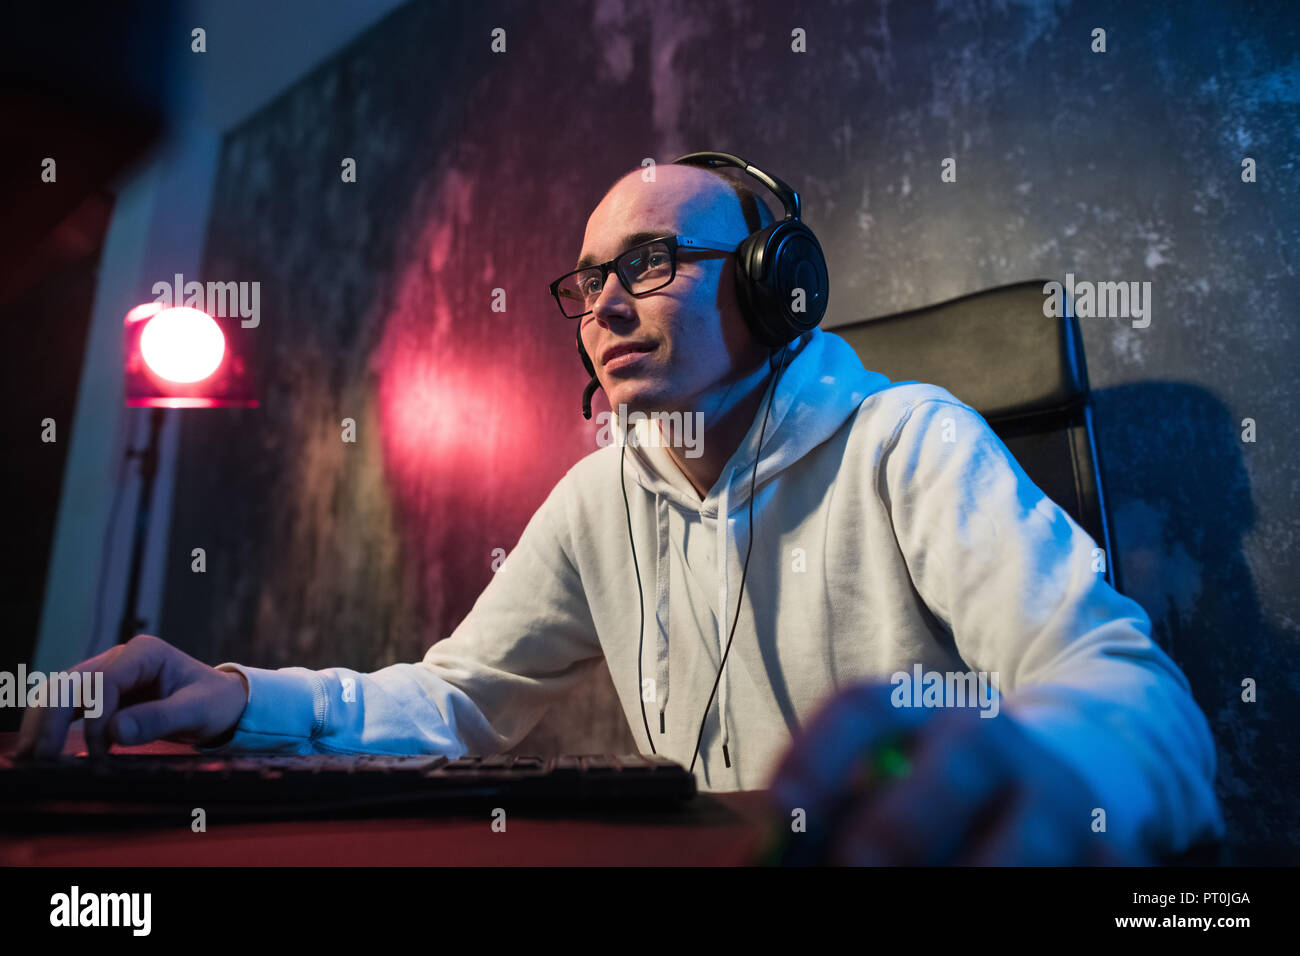 Professional Boy Gamer Plays in Video Game on a eSports Tournament or in Internet Cafe. He Wears Headphones and Speaks Commands into Microphone. Stock Photo